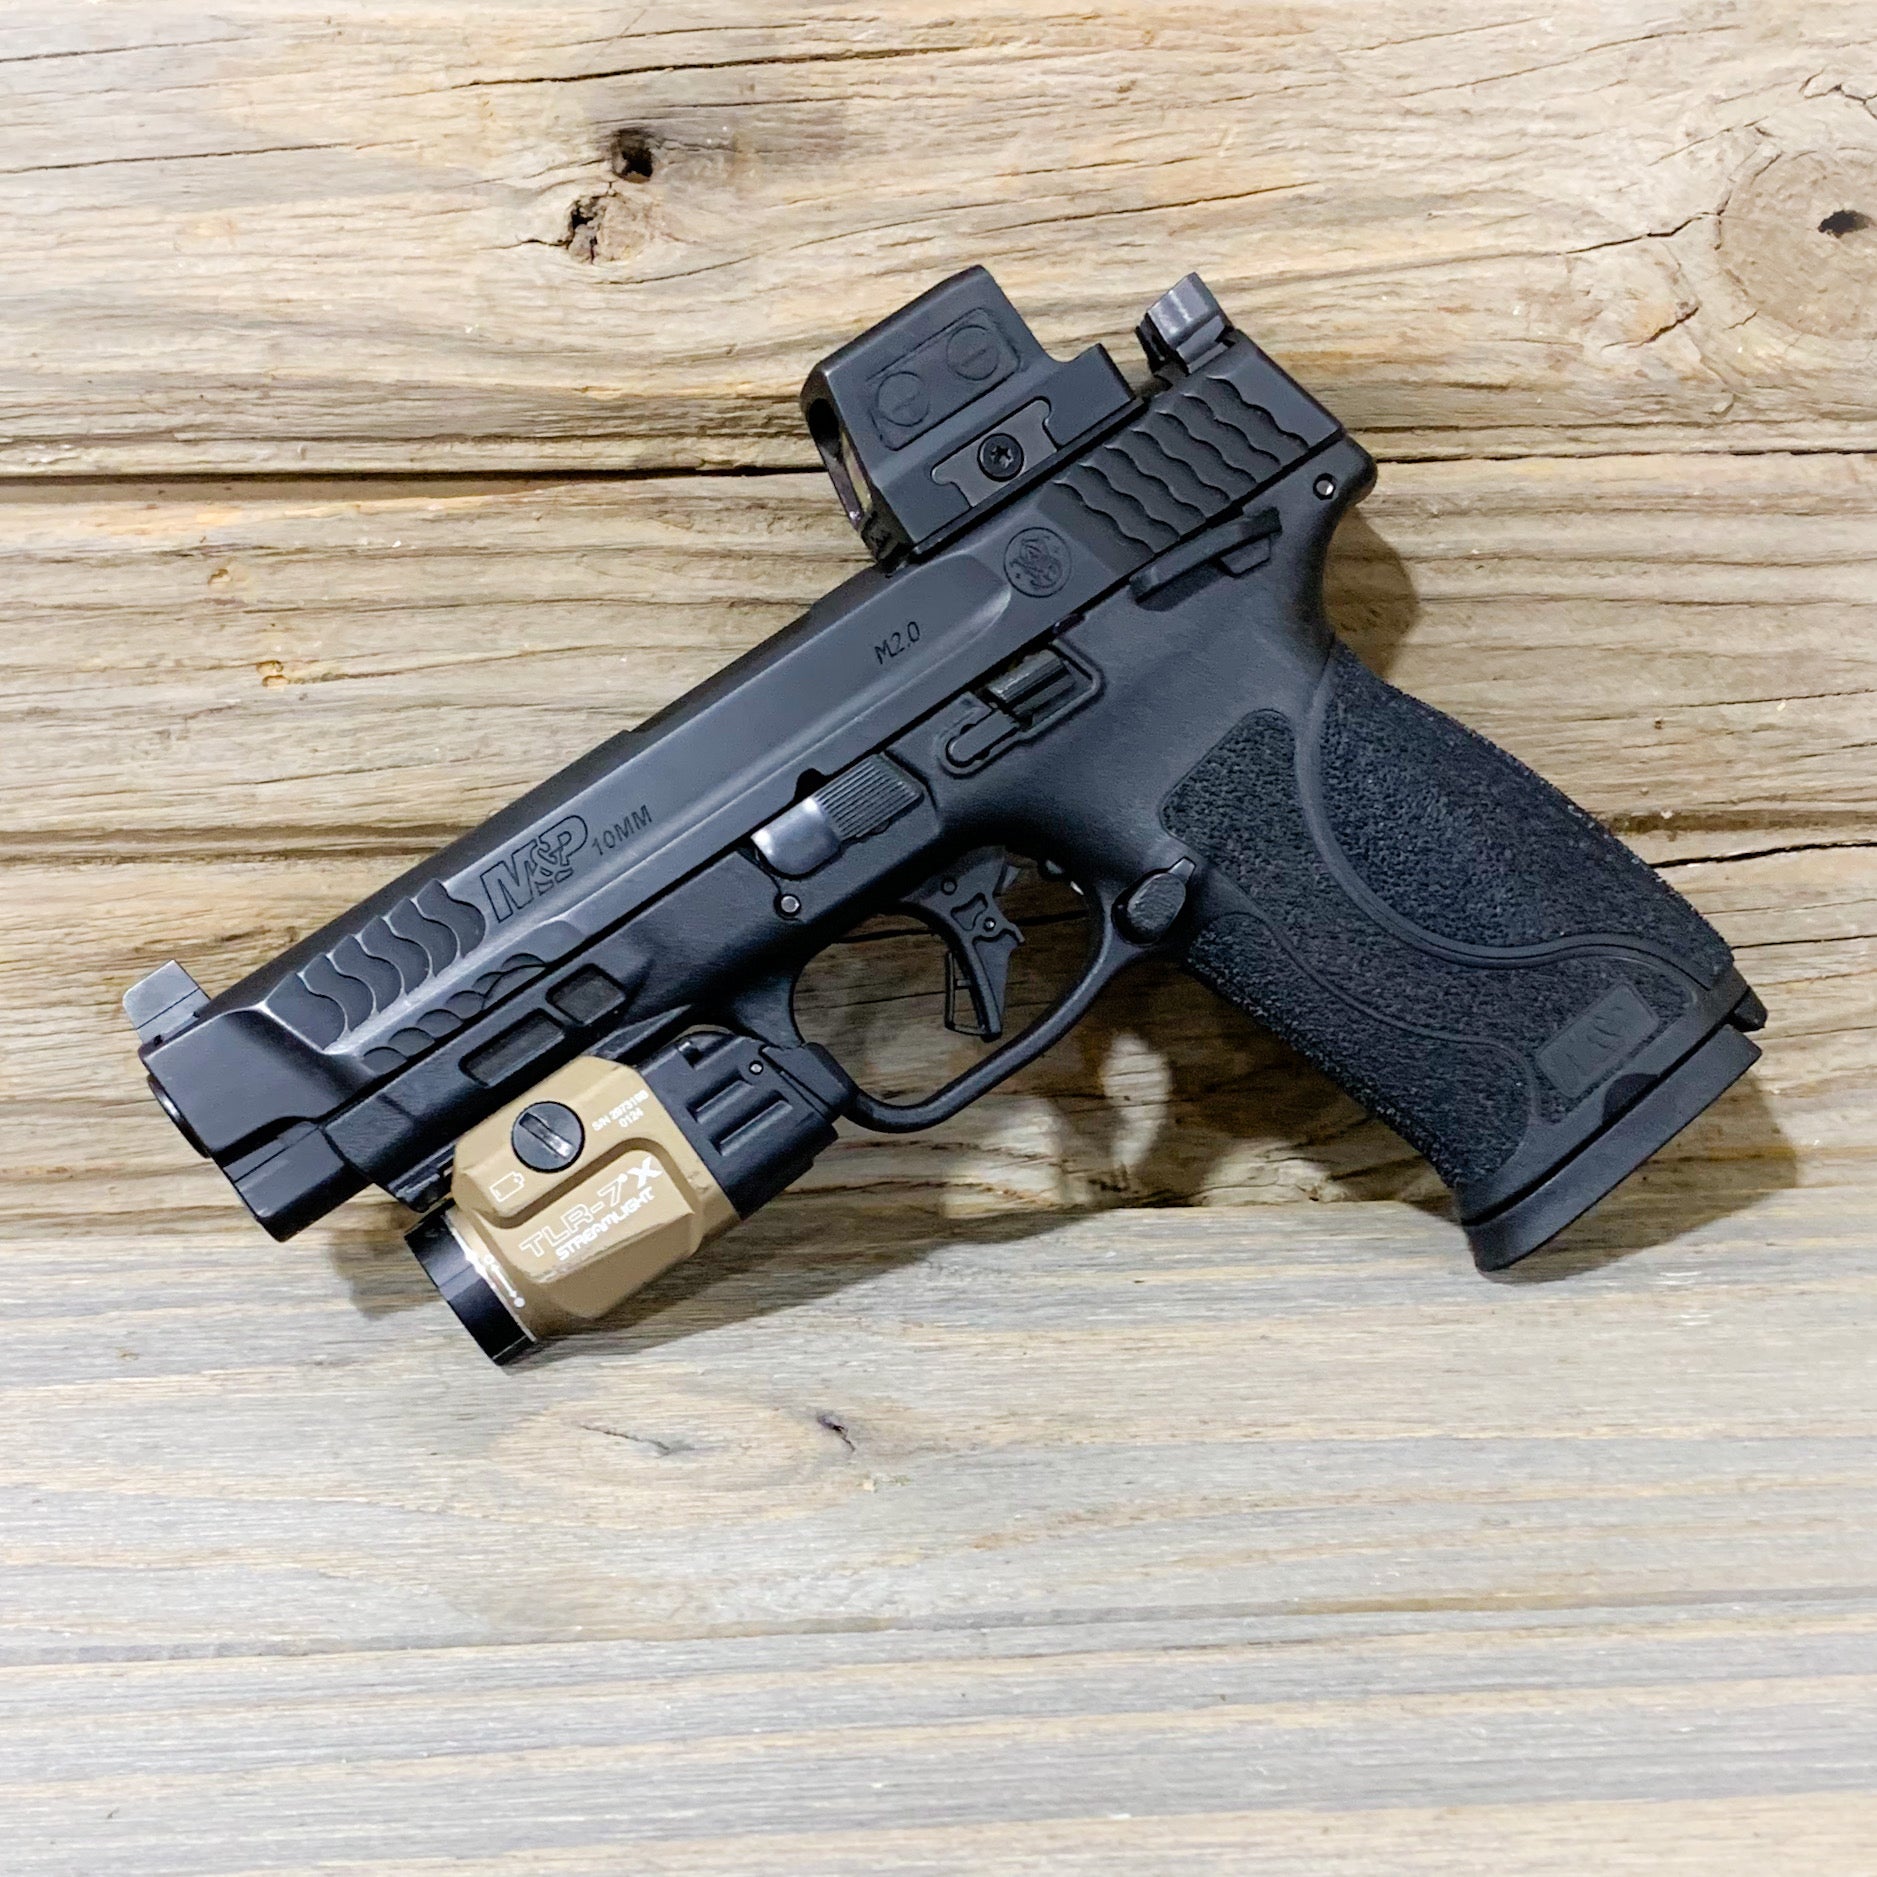 For the best Outside Waistband Kydex Duty & Competition Holster for the Smith and Wesson M&P 4.6" 10MM M2.0 pistol with thumb safety and Streamlight TLR-7, TLR-7A or TLR-7X shop Four Brothers Holsters. Full sweat guard, adjustable retention, cleared for red dot sights. Made in the USA for veterans and law enforcement.